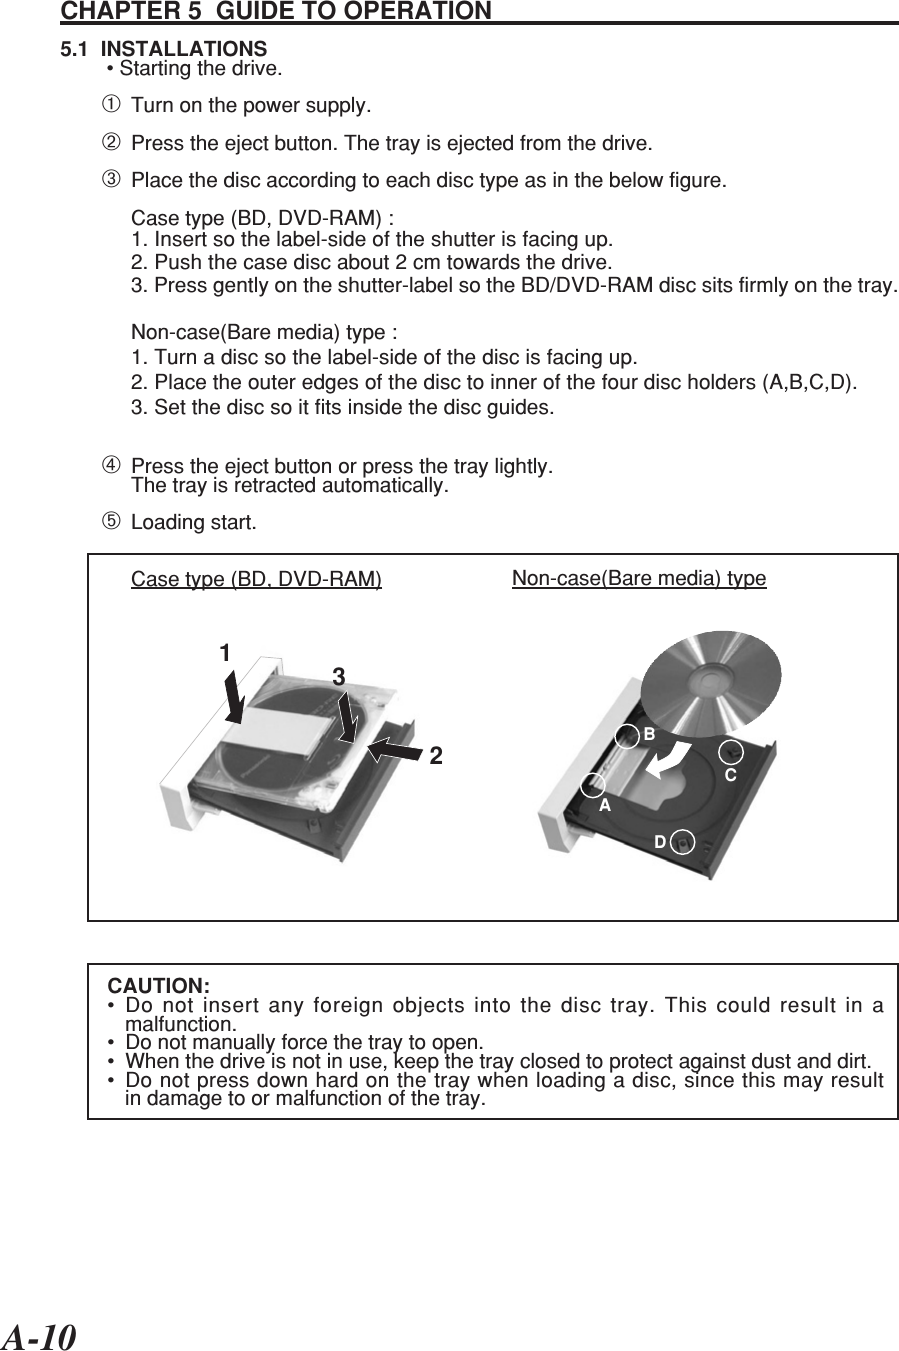 A-10CHAPTER 5  GUIDE TO OPERATION5.1  INSTALLATIONS        • Starting the drive.➀Turn on the power supply.➁Press the eject button. The tray is ejected from the drive.➂Place the disc according to each disc type as in the below figure.Case type (BD, DVD-RAM) :1. Insert so the label-side of the shutter is facing up.2. Push the case disc about 2 cm towards the drive.3. Press gently on the shutter-label so the BD/DVD-RAM disc sits firmly on the tray.Non-case(Bare media) type :1. Turn a disc so the label-side of the disc is facing up.2. Place the outer edges of the disc to inner of the four disc holders (A,B,C,D).3. Set the disc so it fits inside the disc guides.➃Press the eject button or press the tray lightly.The tray is retracted automatically.➄Loading start.Case type (BD, DVD-RAM) Non-case(Bare media) typeCAUTION:•Do not insert any foreign objects into the disc tray. This could result in amalfunction.•Do not manually force the tray to open.• When the drive is not in use, keep the tray closed to protect against dust and dirt.•Do not press down hard on the tray when loading a disc, since this may resultin damage to or malfunction of the tray.123ABCD